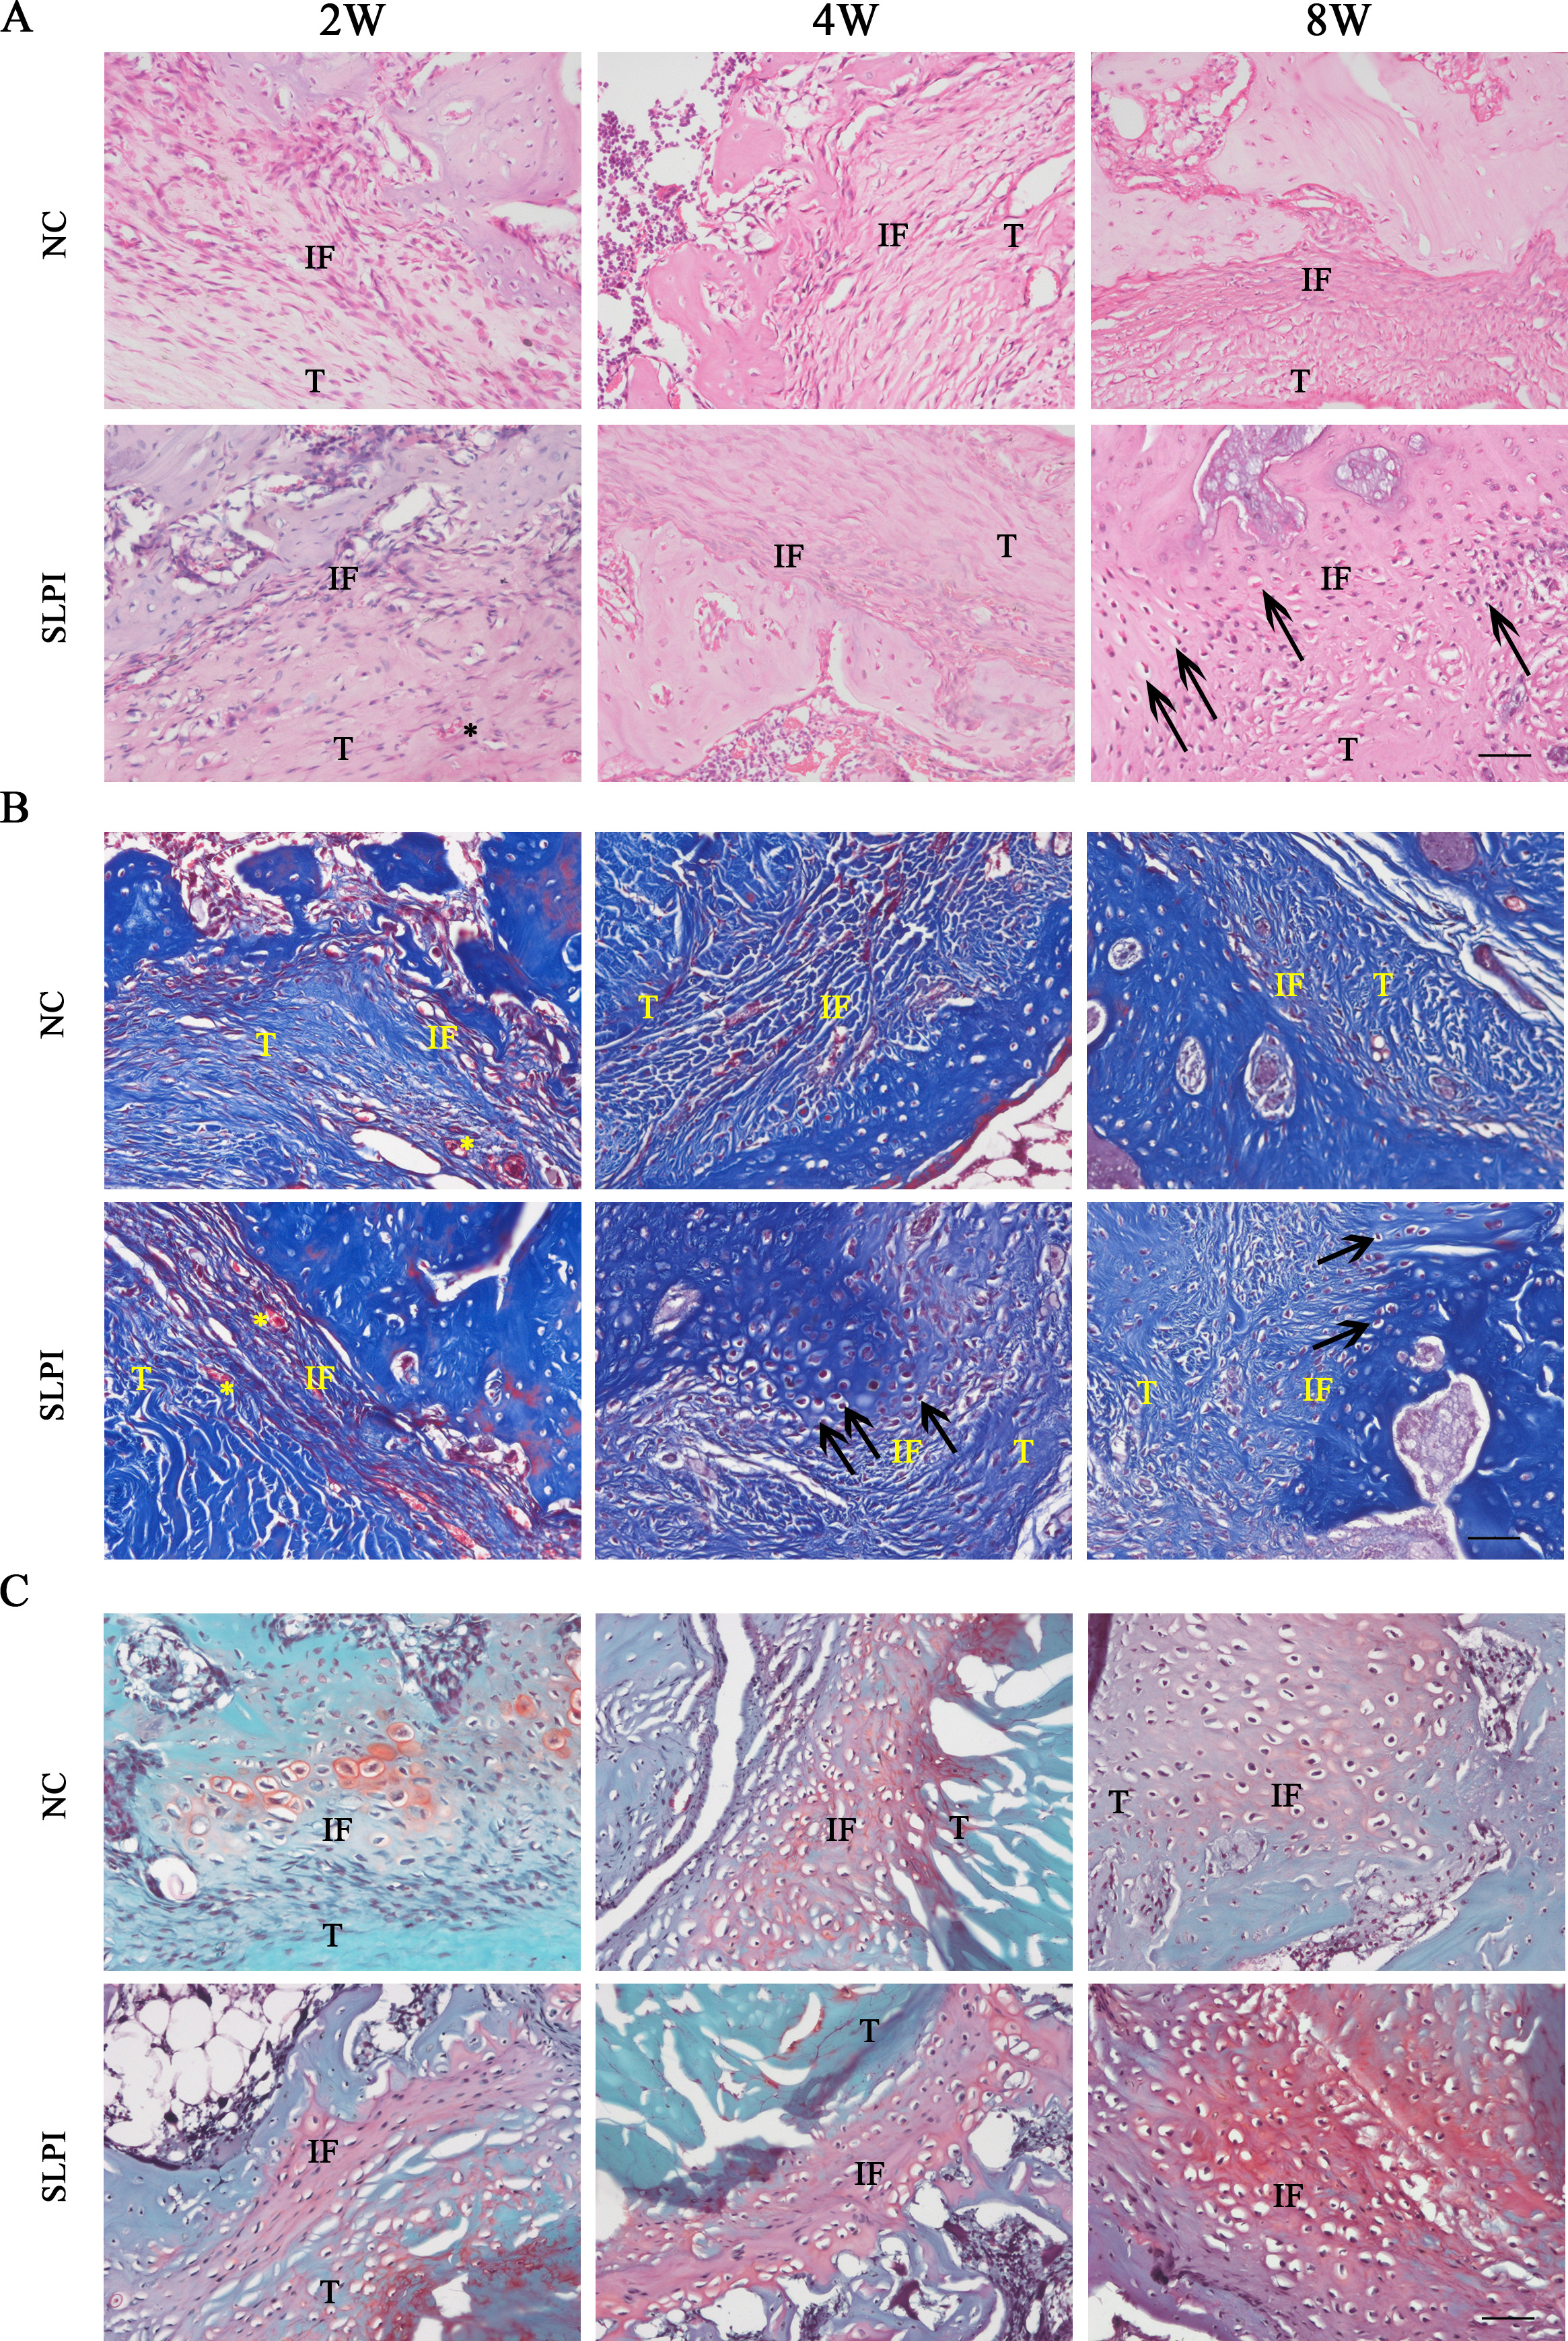 Fig. 6 
            a) Haemotoxylin and eosin (H&E) staining of the tendon-bone interface at two, four, and eight weeks after surgery in the secretory leucocyte protease inhibitor (SLPI) and negative control (NC) groups, respectively (n = 4). b) Masson’s trichrome staining of the tendon-bone interface of samples at two, four, and eight weeks in the SLPI and NC groups, respectively (n = 4). c) Modified Safranin-O/Fast Green staining of the tendon-bone interface at two, four, and eight weeks in the SLPI and NC groups, respectively (n = 4). IF, interface; T, tendon; arrow: cartilage-like cell, asterisk: neovascularization; bar 20 μm.
          